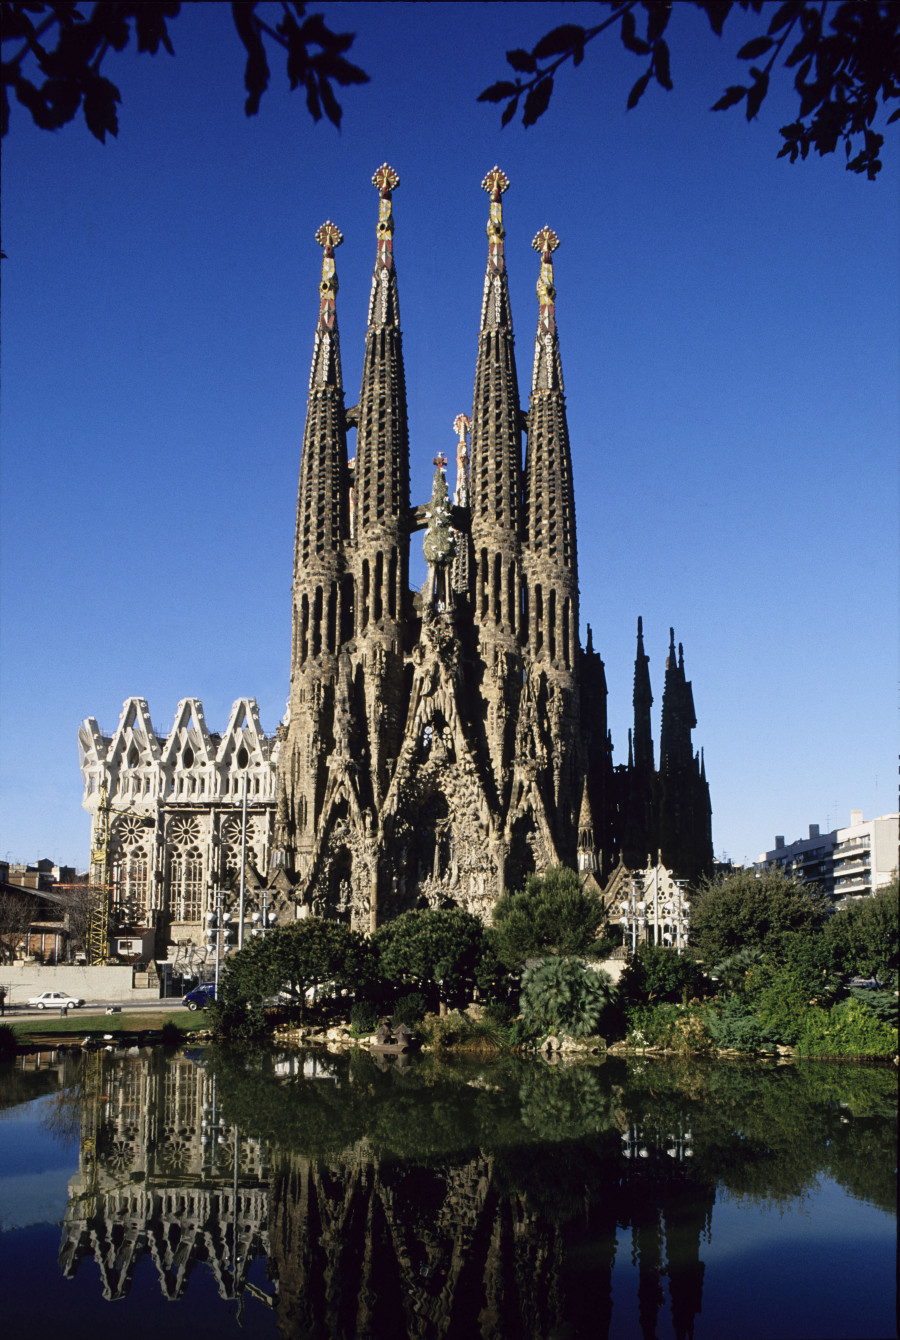 10 Architectural Landmarks You Have To Visit Before You Die | HuffPost